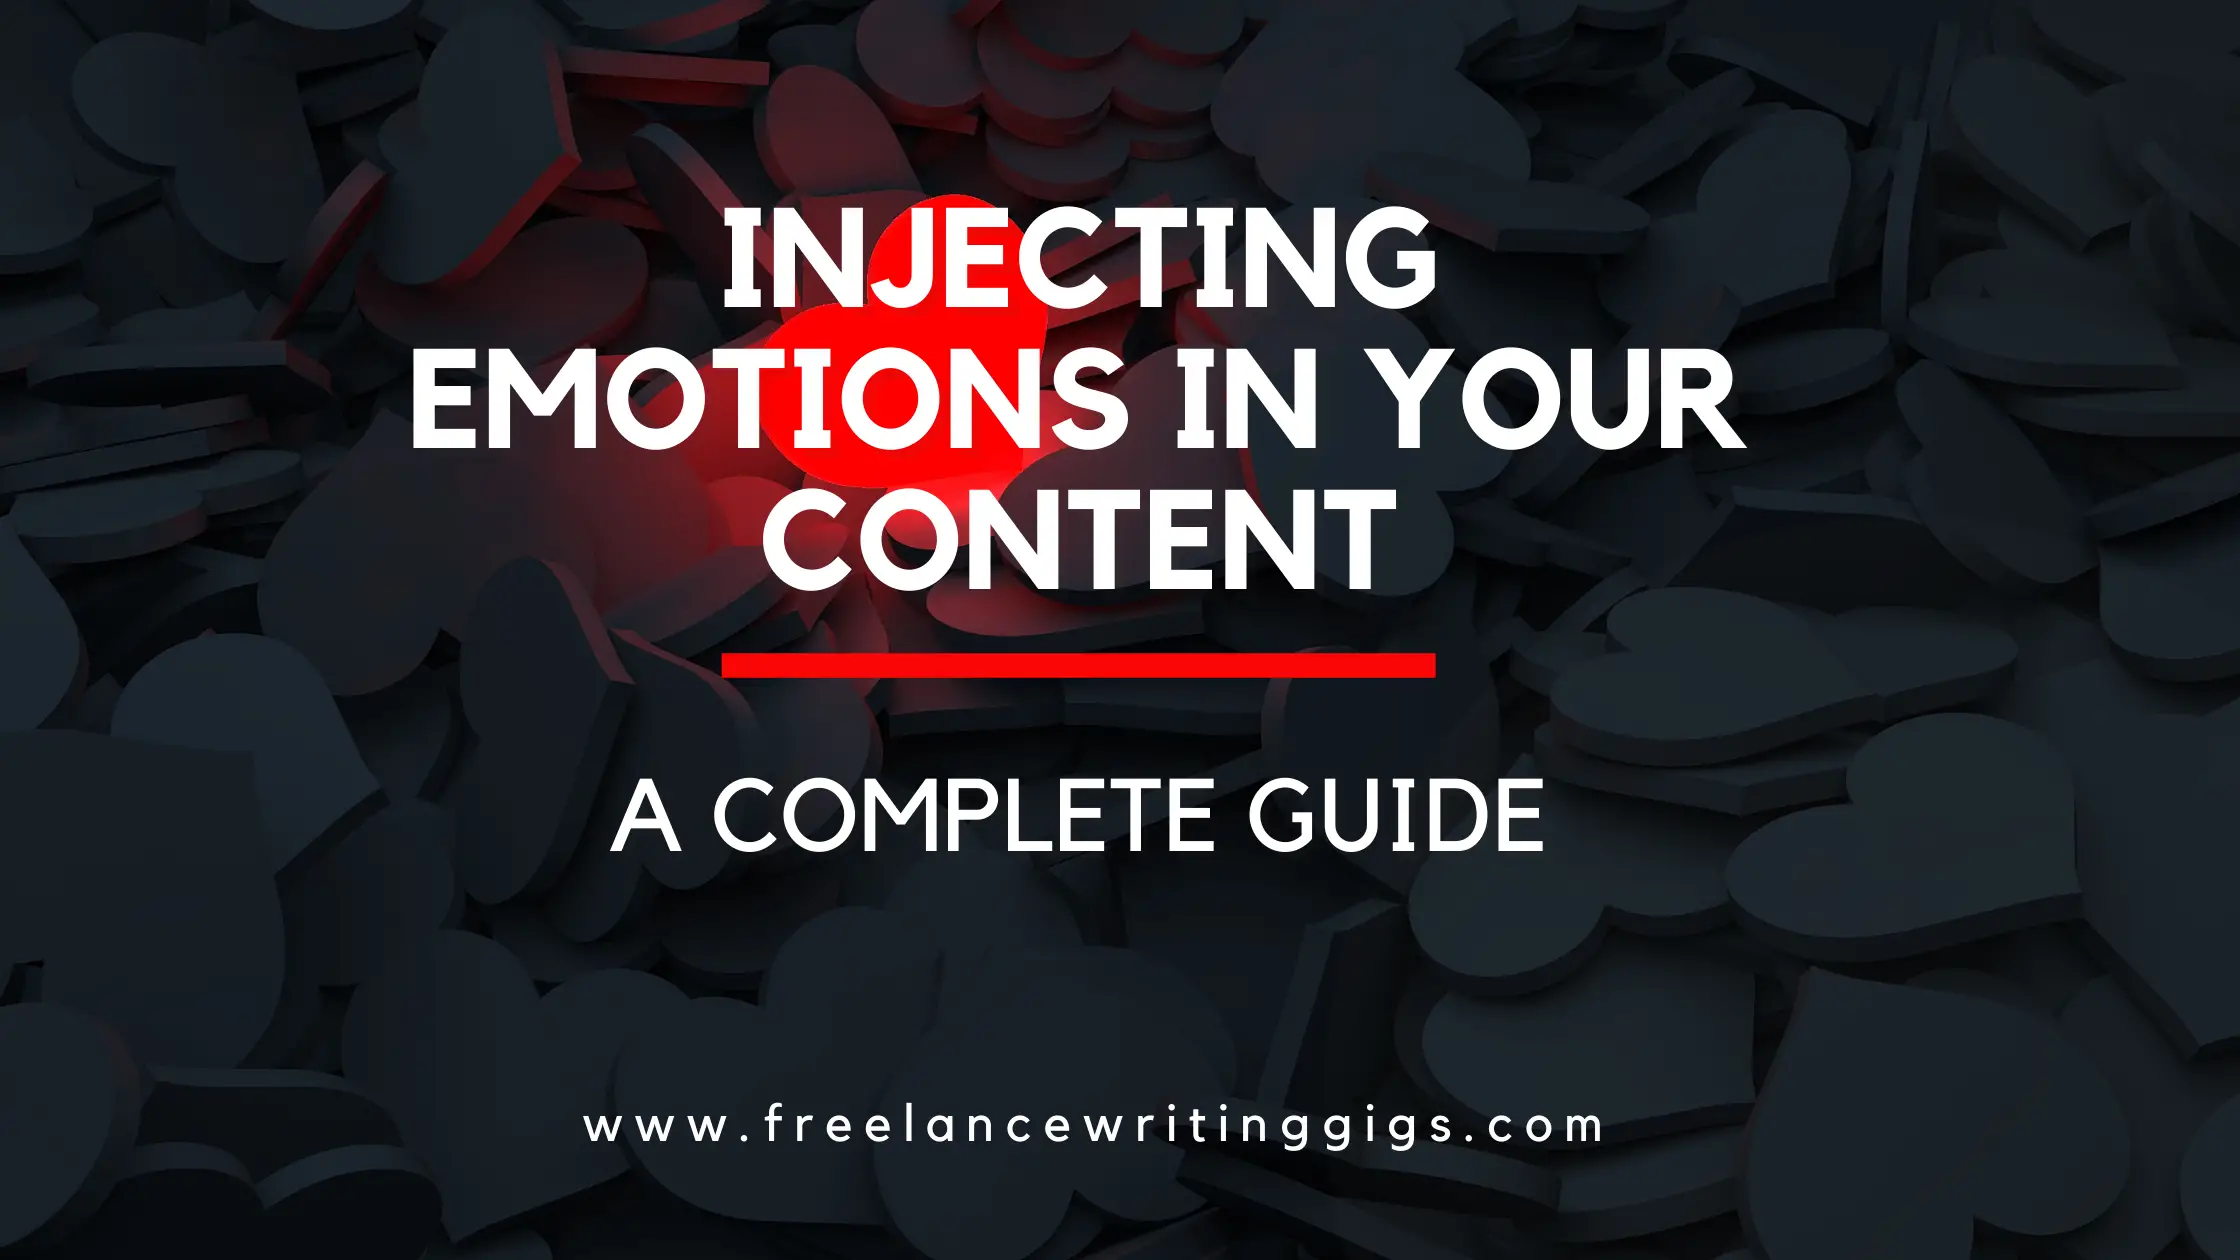 Content & Emotion: A Complete Guide to Injecting Emotions in Your Content 